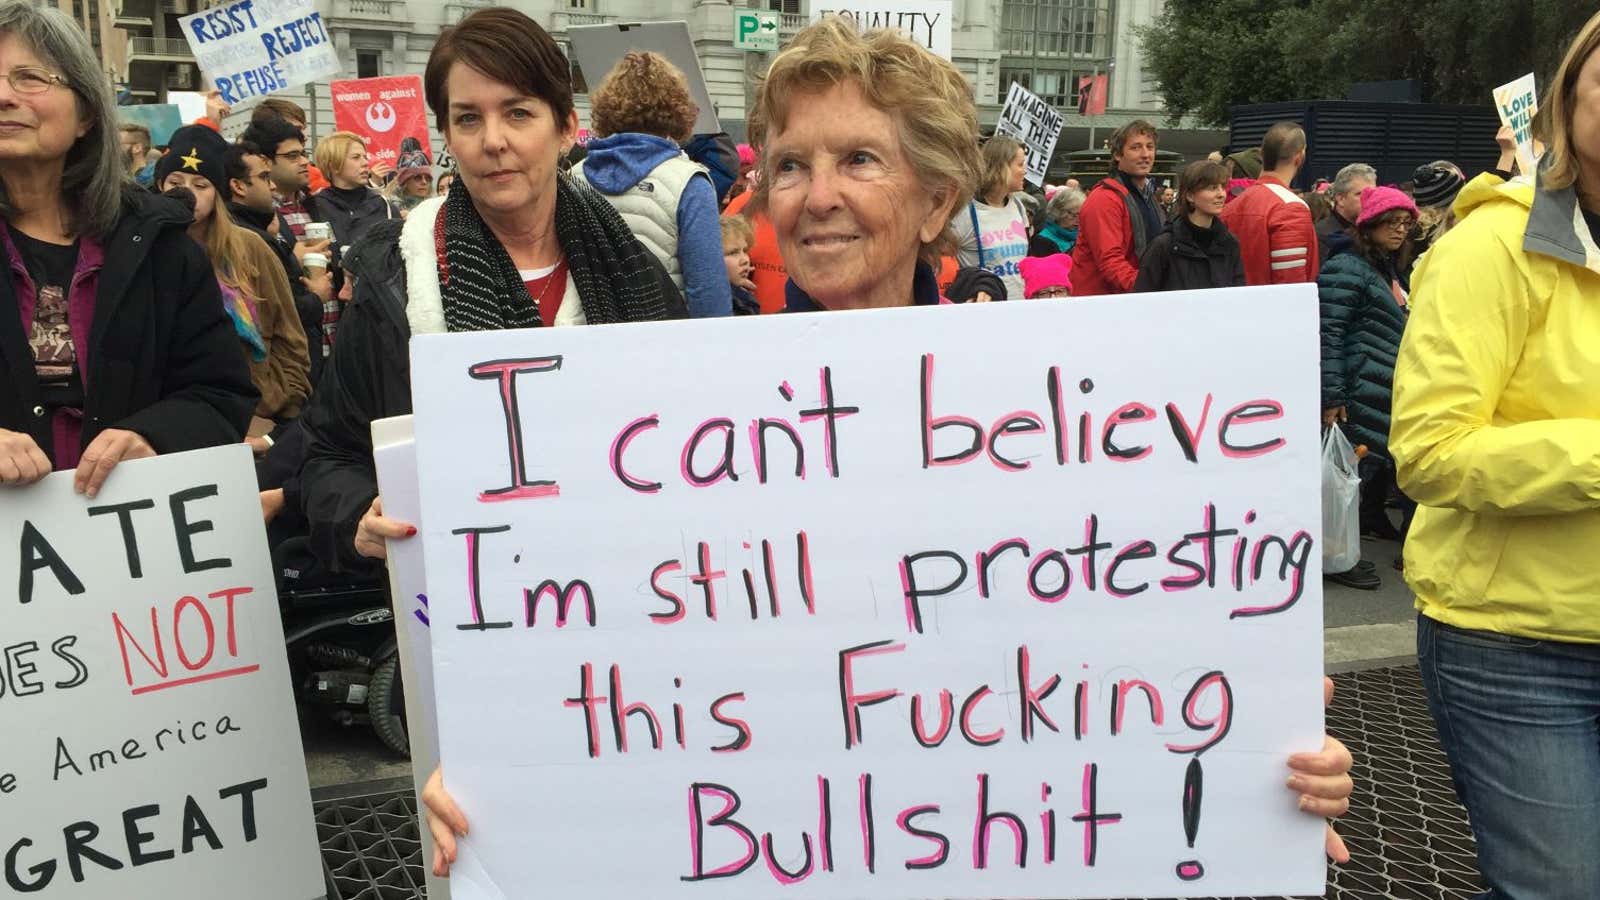 At a Women’s March in San Francisco on Jan 21.